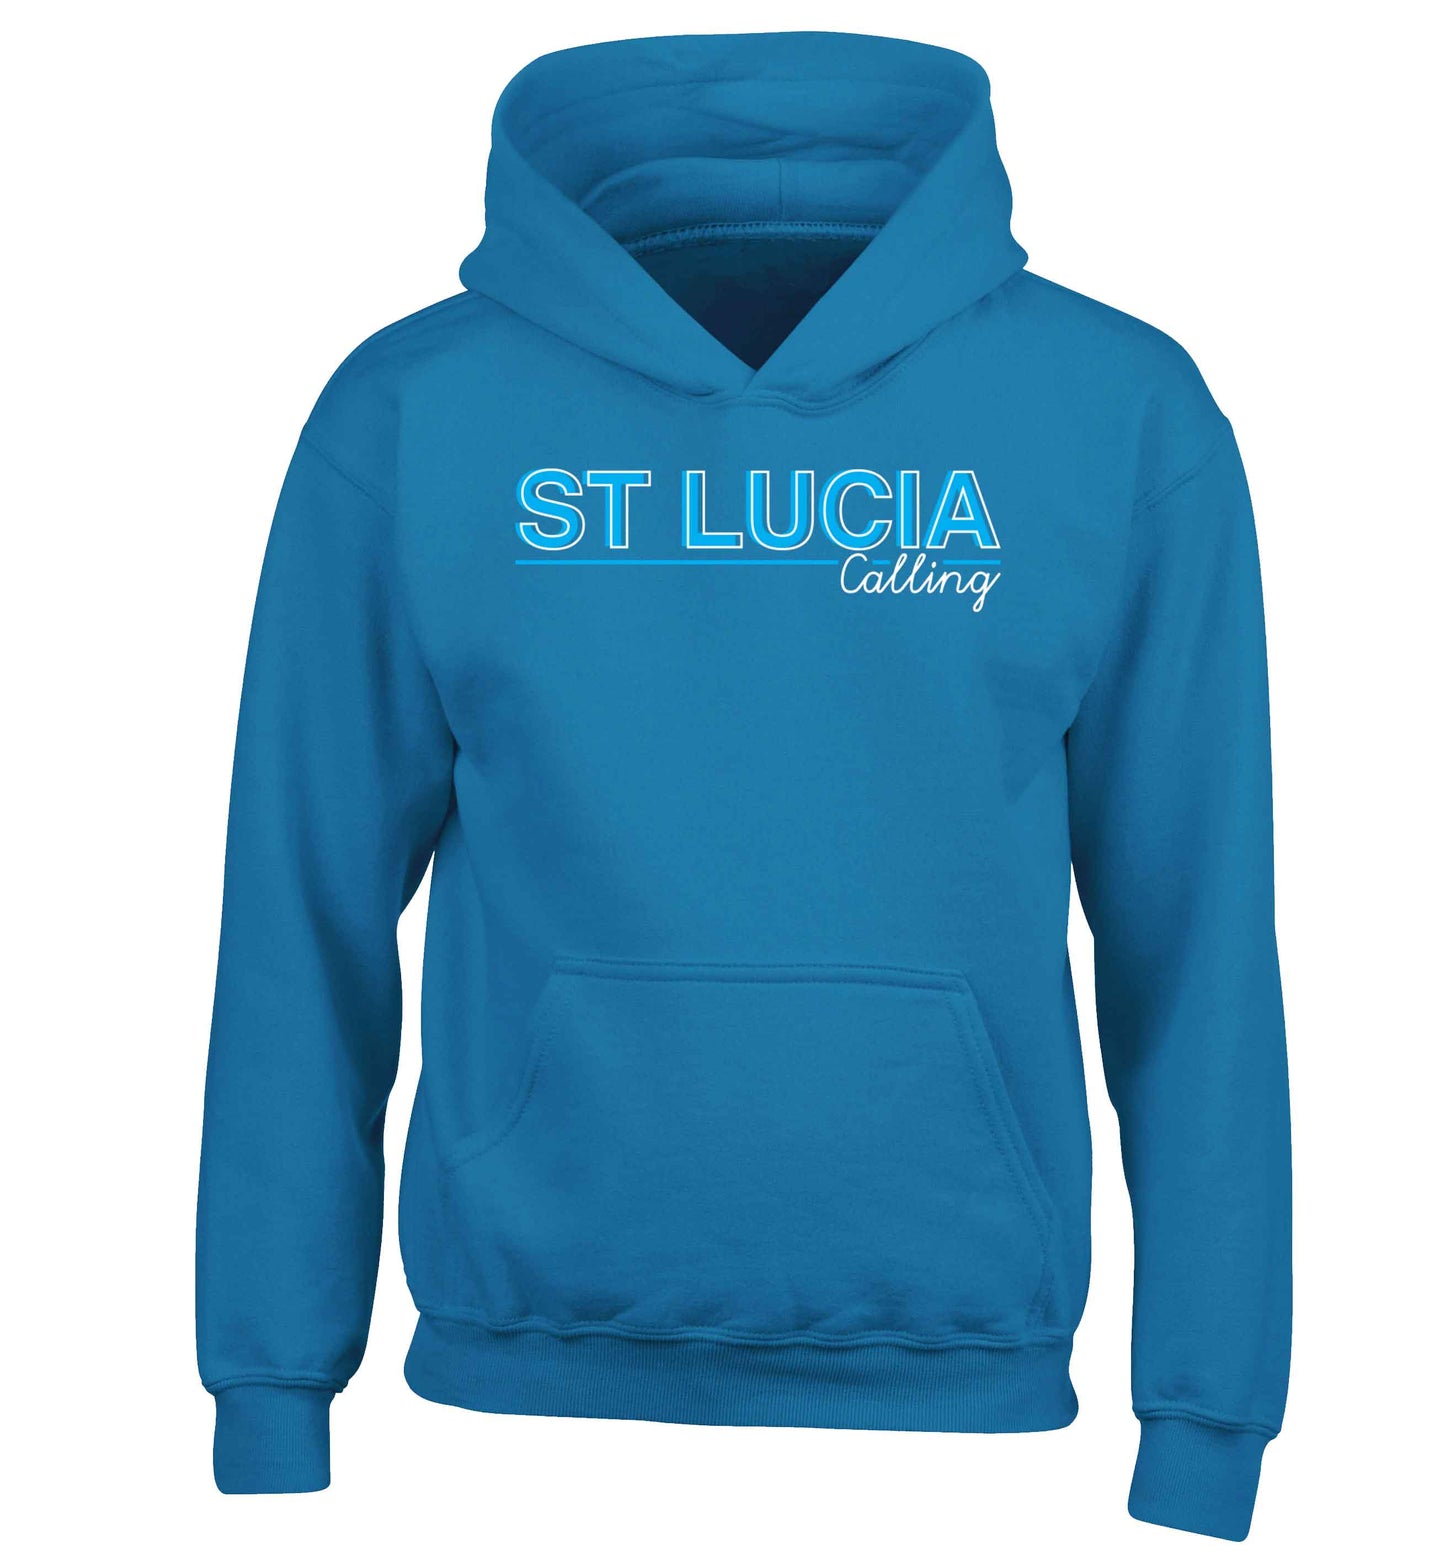 St Lucia calling children's blue hoodie 12-13 Years